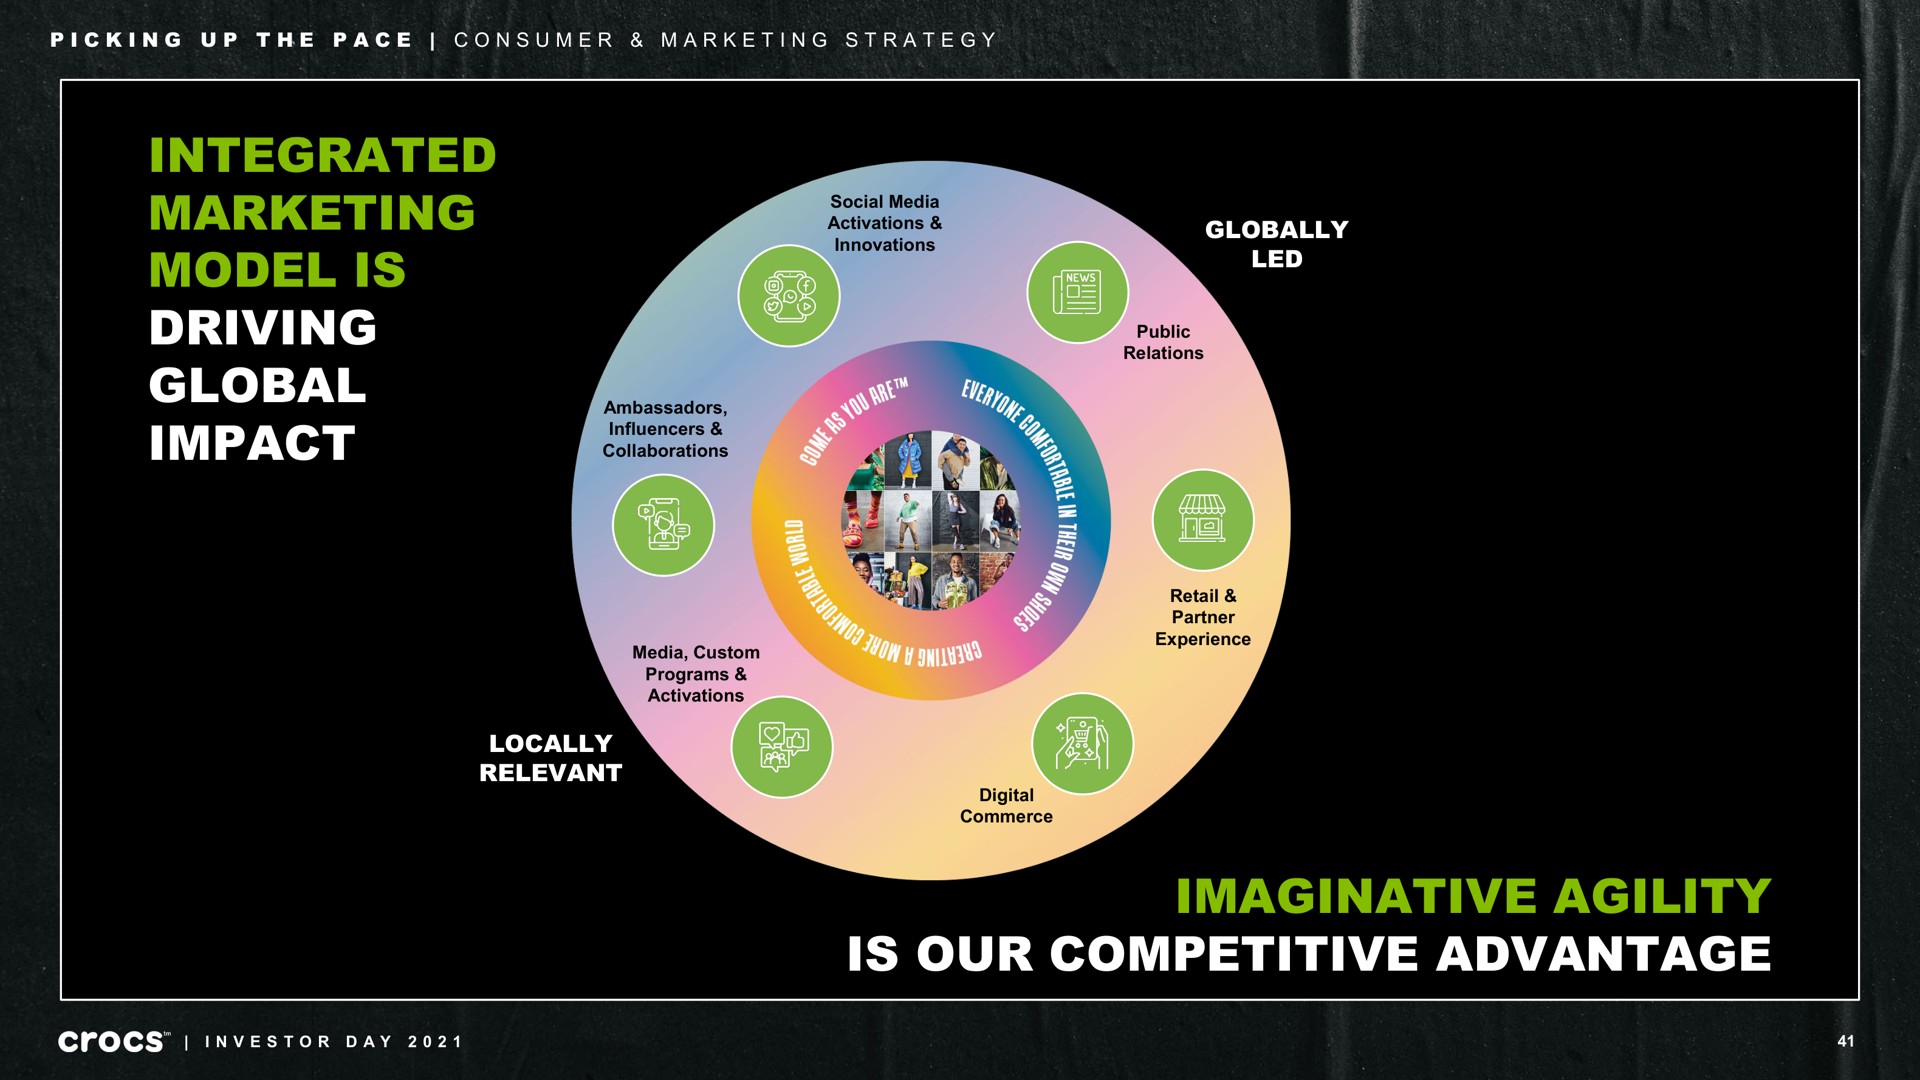 integrated marketing model is driving global impact globally led locally relevant imaginative agility is our competitive advantage picking up the pace consumer strategy ary a investor day | Crocs